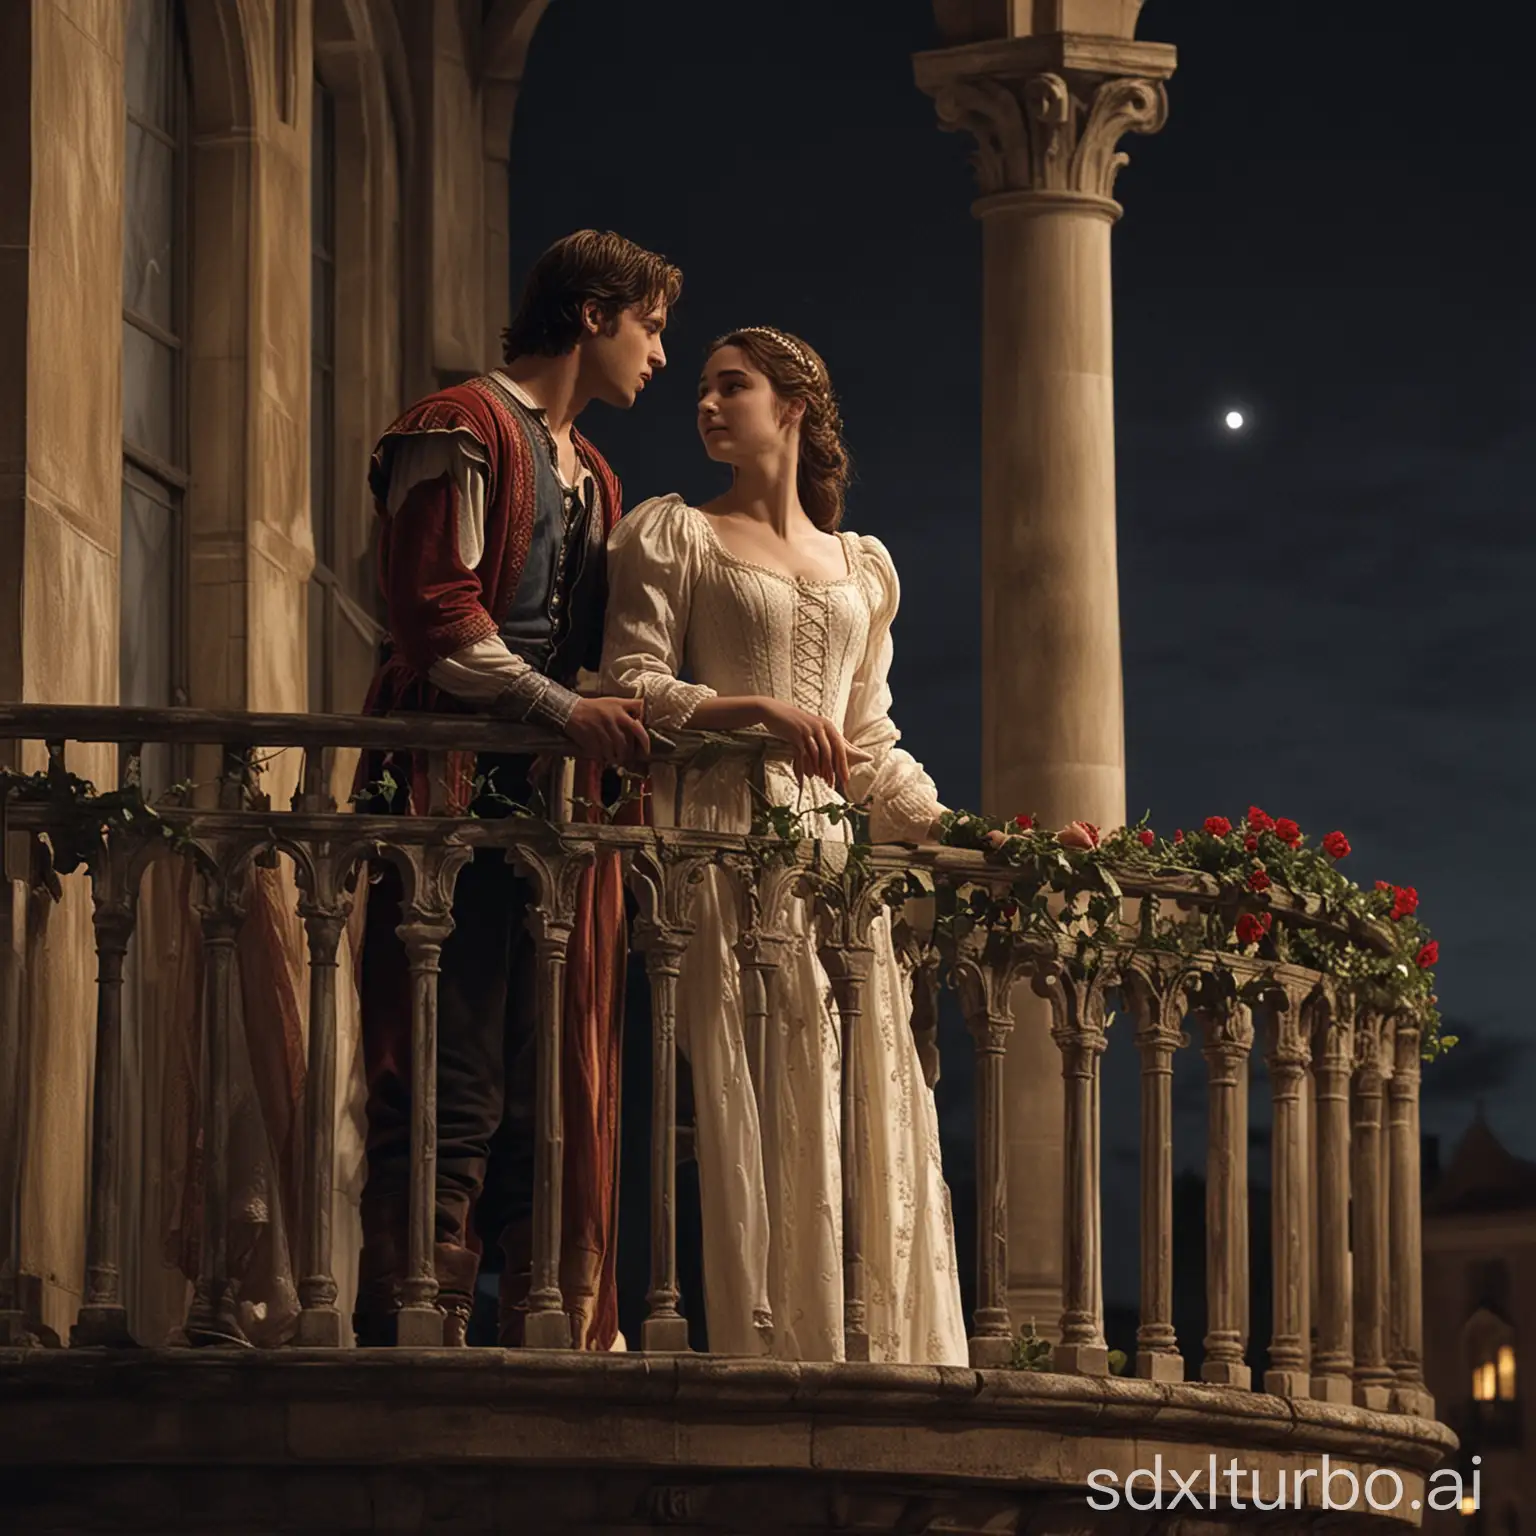 The night is enchanting, Juliet stands on the balcony, while Romeo softly calls out to his beloved below.